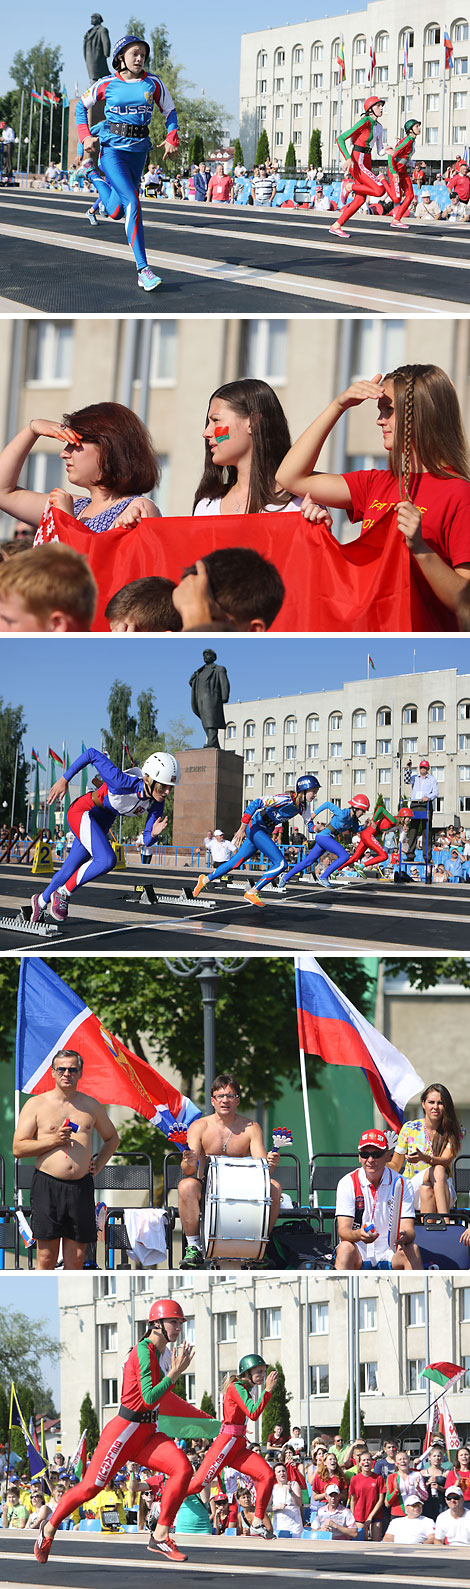 Rescuers’ Championships in Grodno